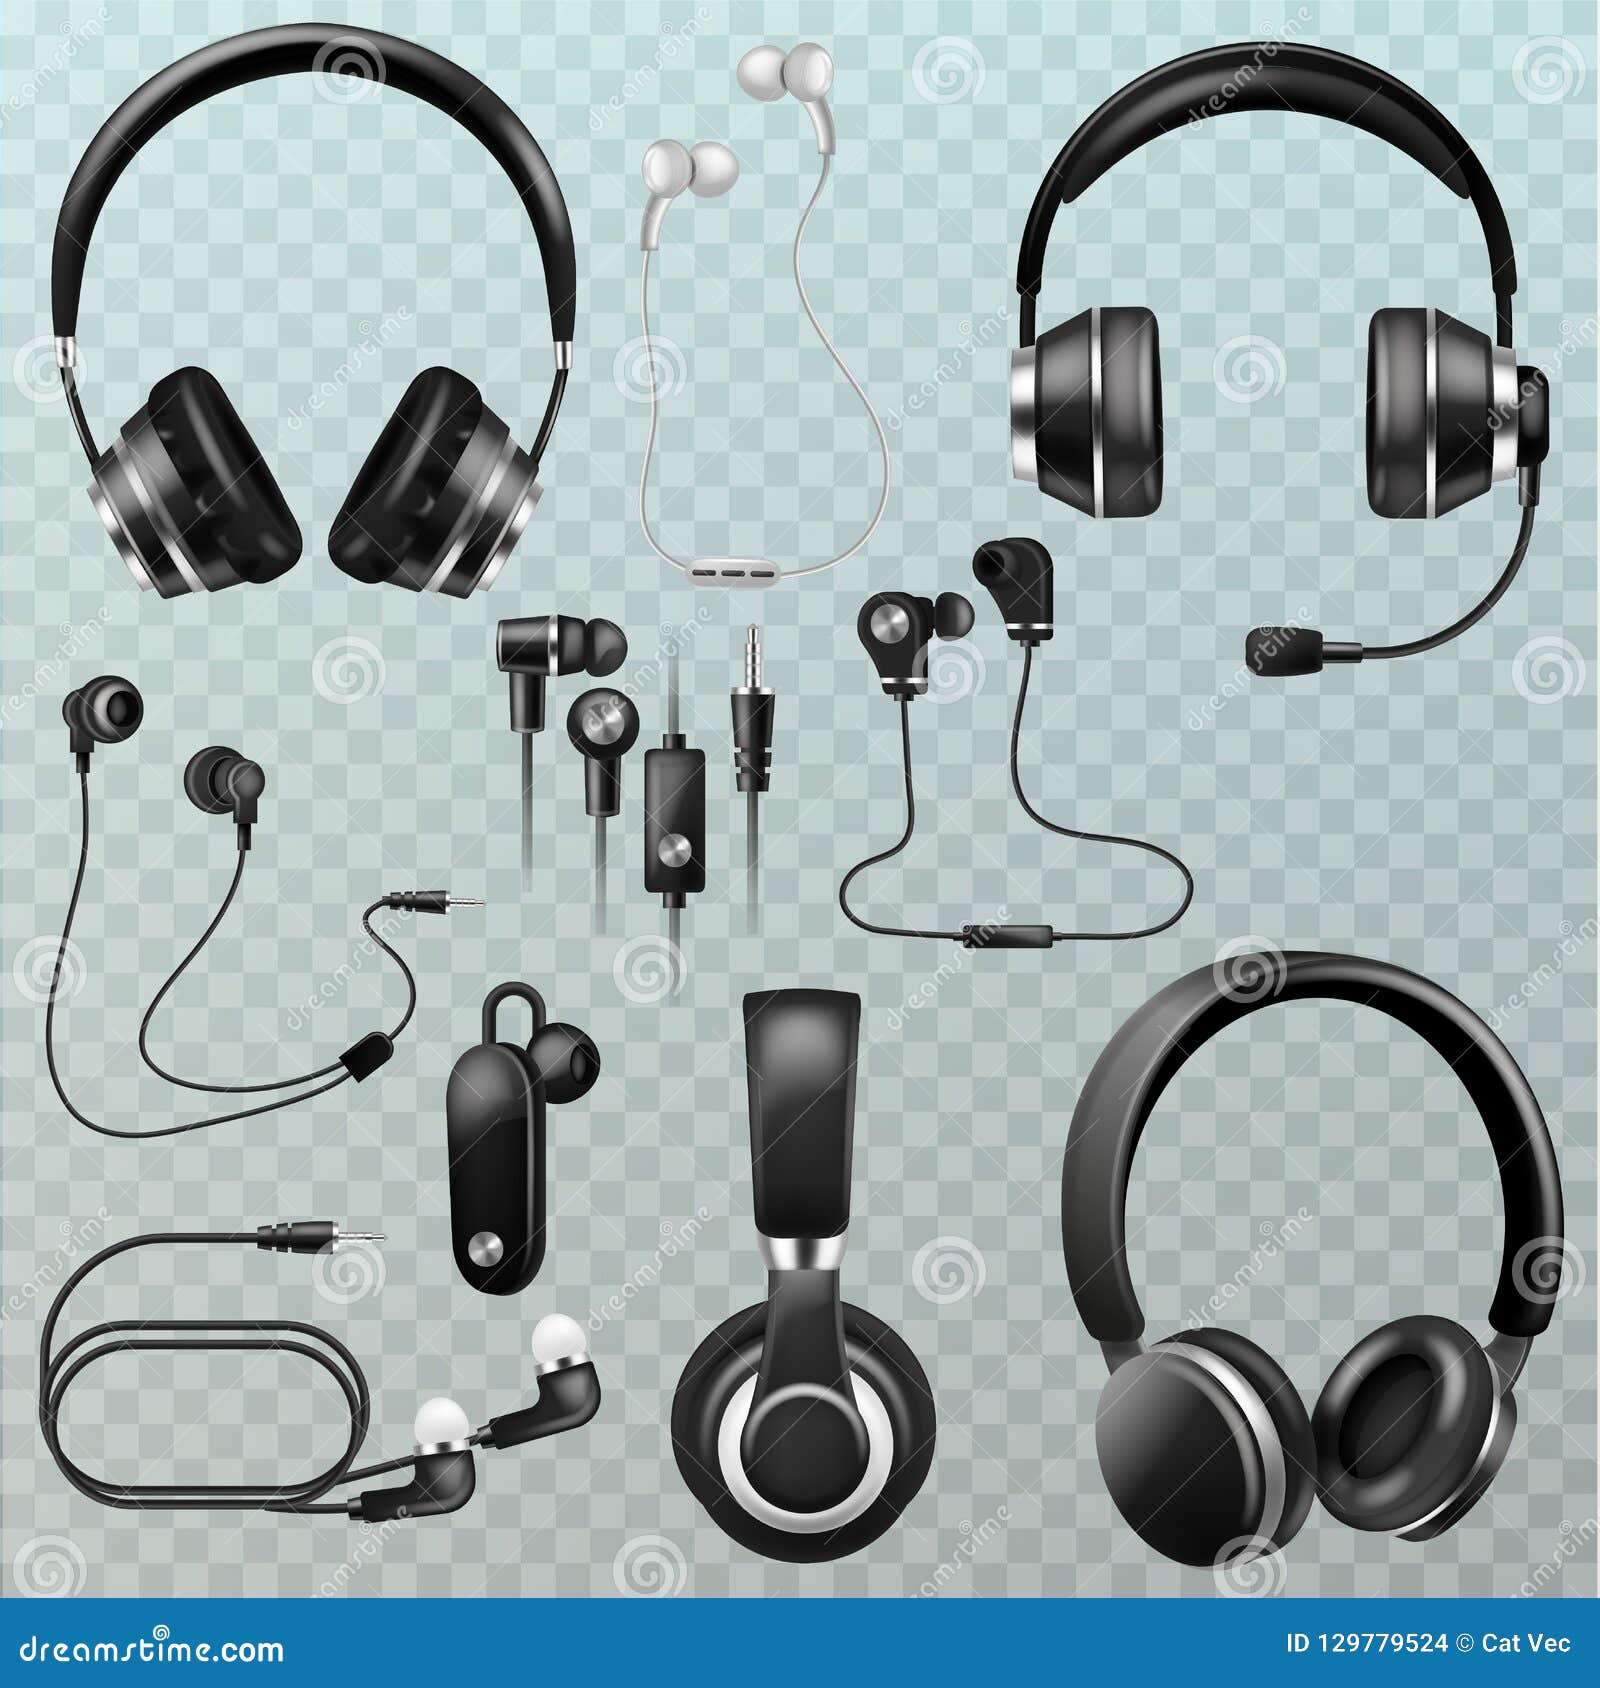 Auriculares Dj Cliparts, Stock Vector and Royalty Free Auriculares Dj  Illustrations